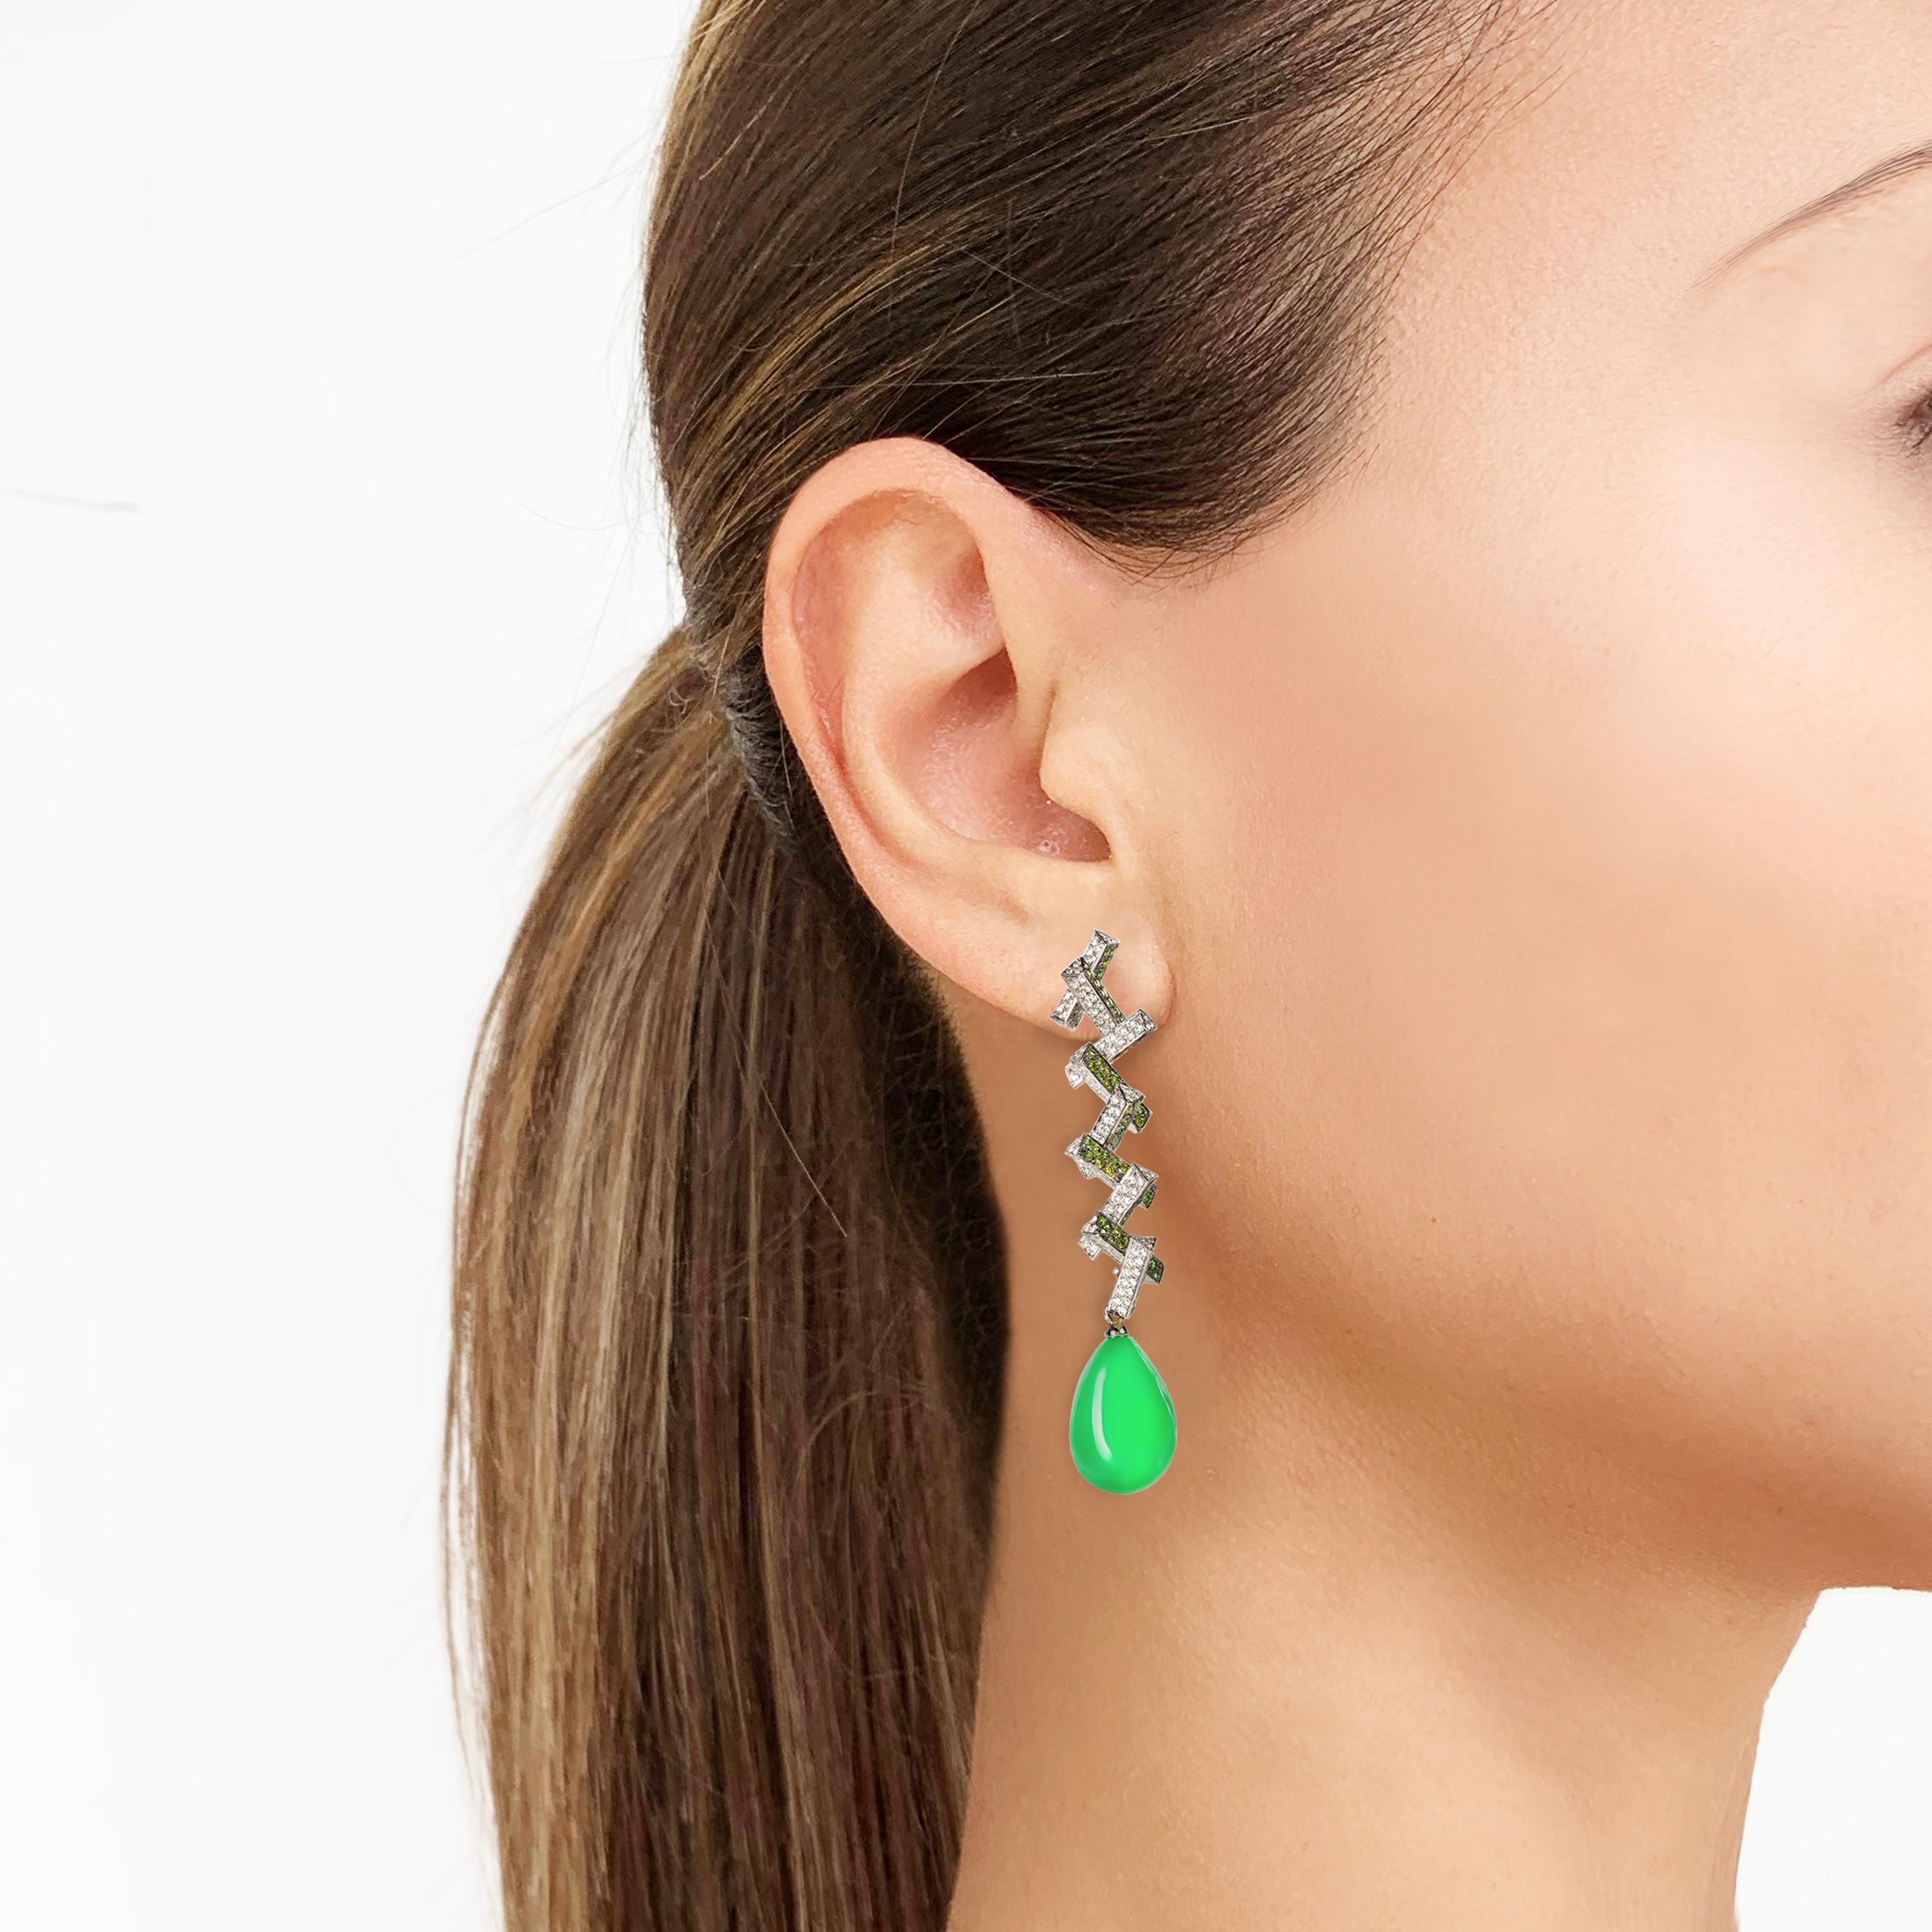 Rosior by Manuel Rosas Contemporary Chandelier Earrings Manufactured in 19,2k White Gold and set with the following:
- 2 Pear Drop Green Opals with 20,65ct, that are Detachable,
- 351 White (G-VVS) Diamonds with 1,56ct,
- 198 Green Diamonds with